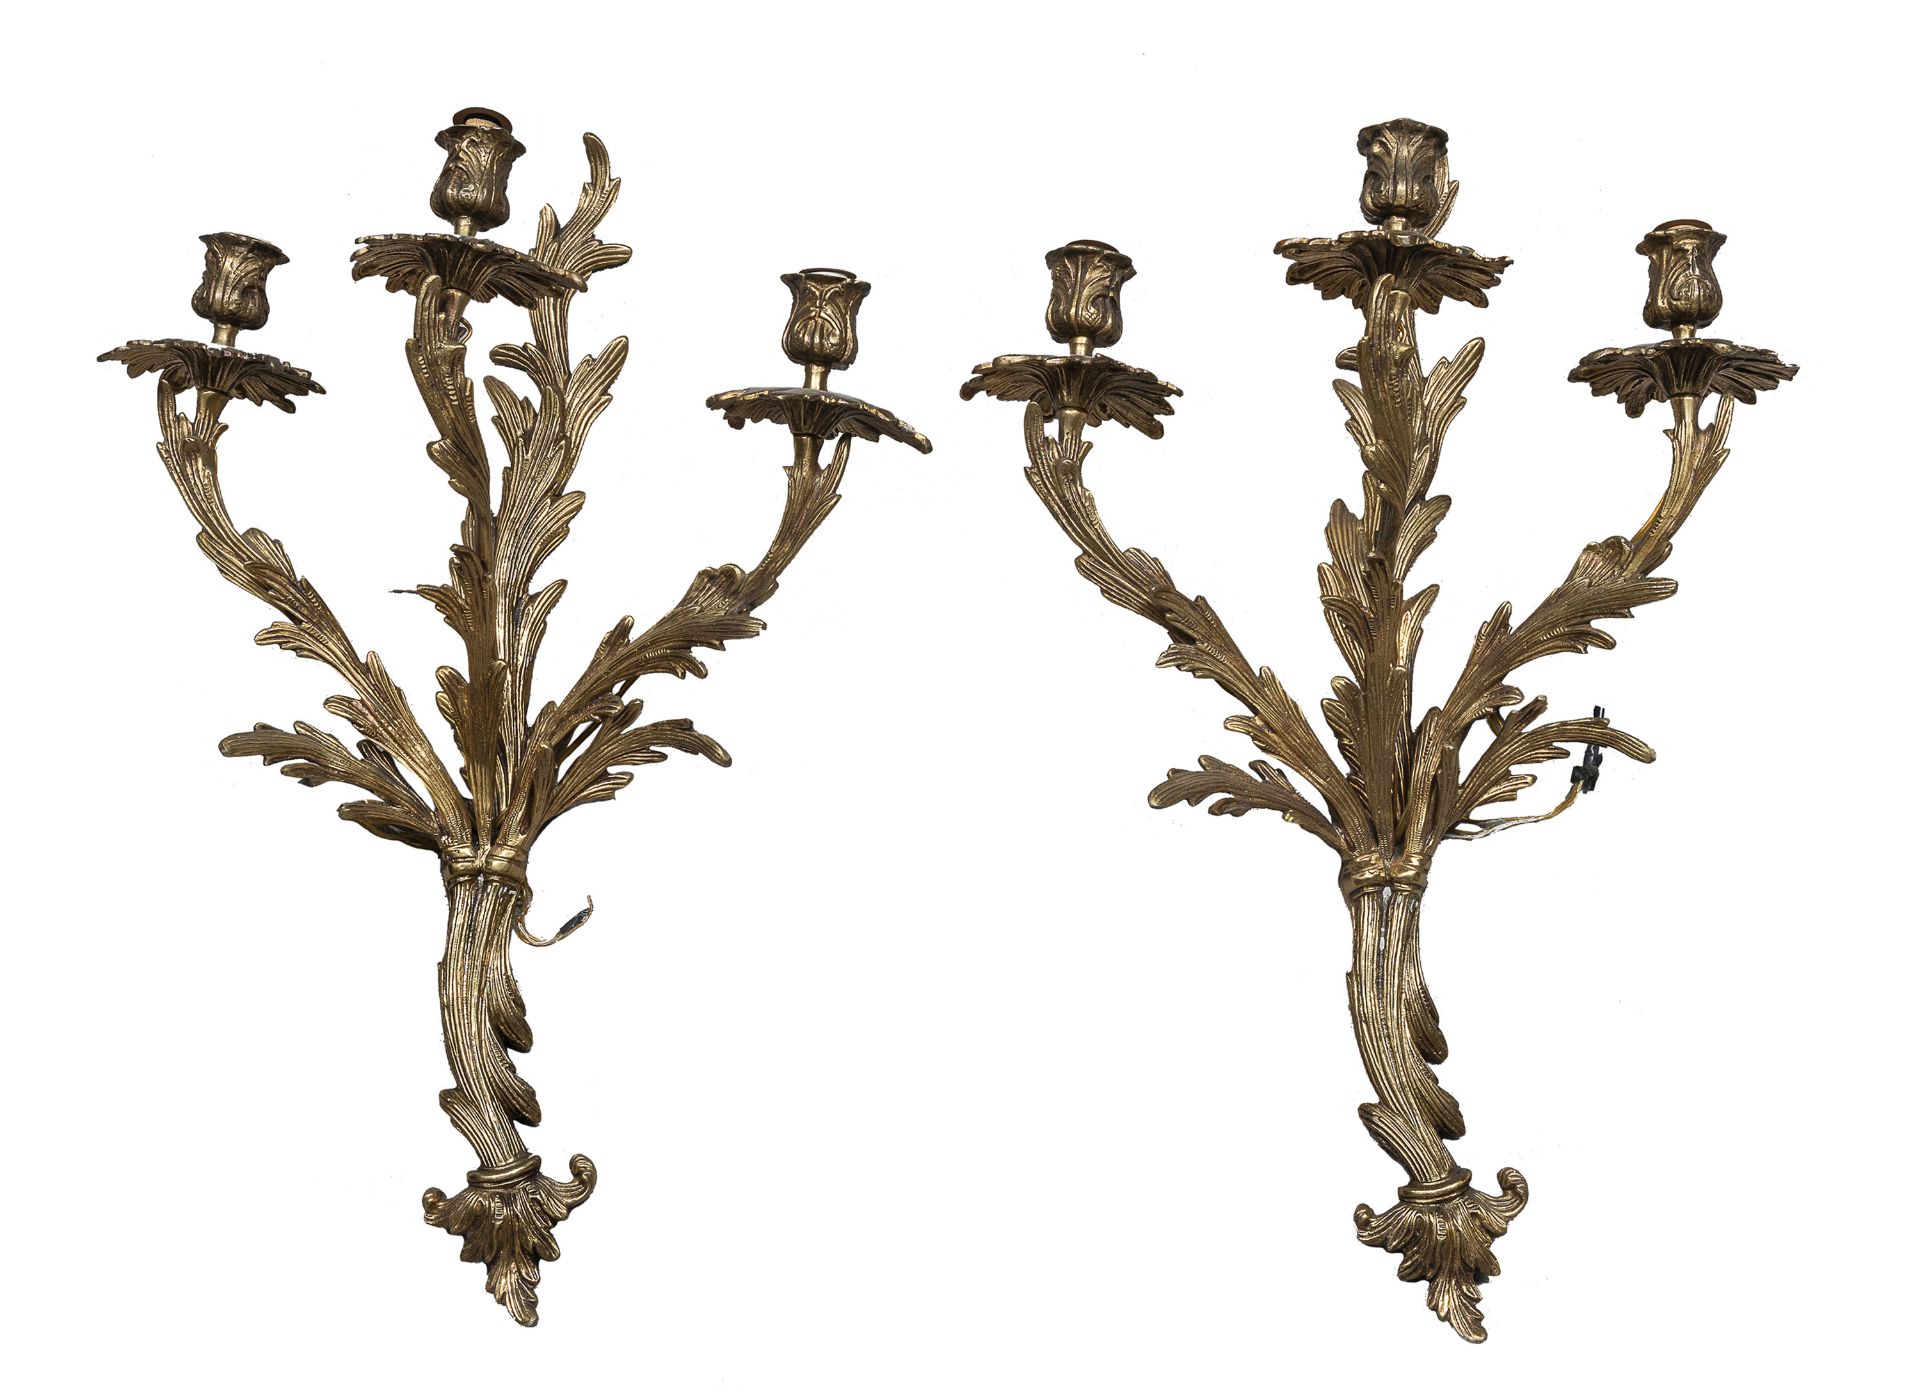 PAIR OF BRONZE WALL LAMPS 18TH CENTURY STYLE